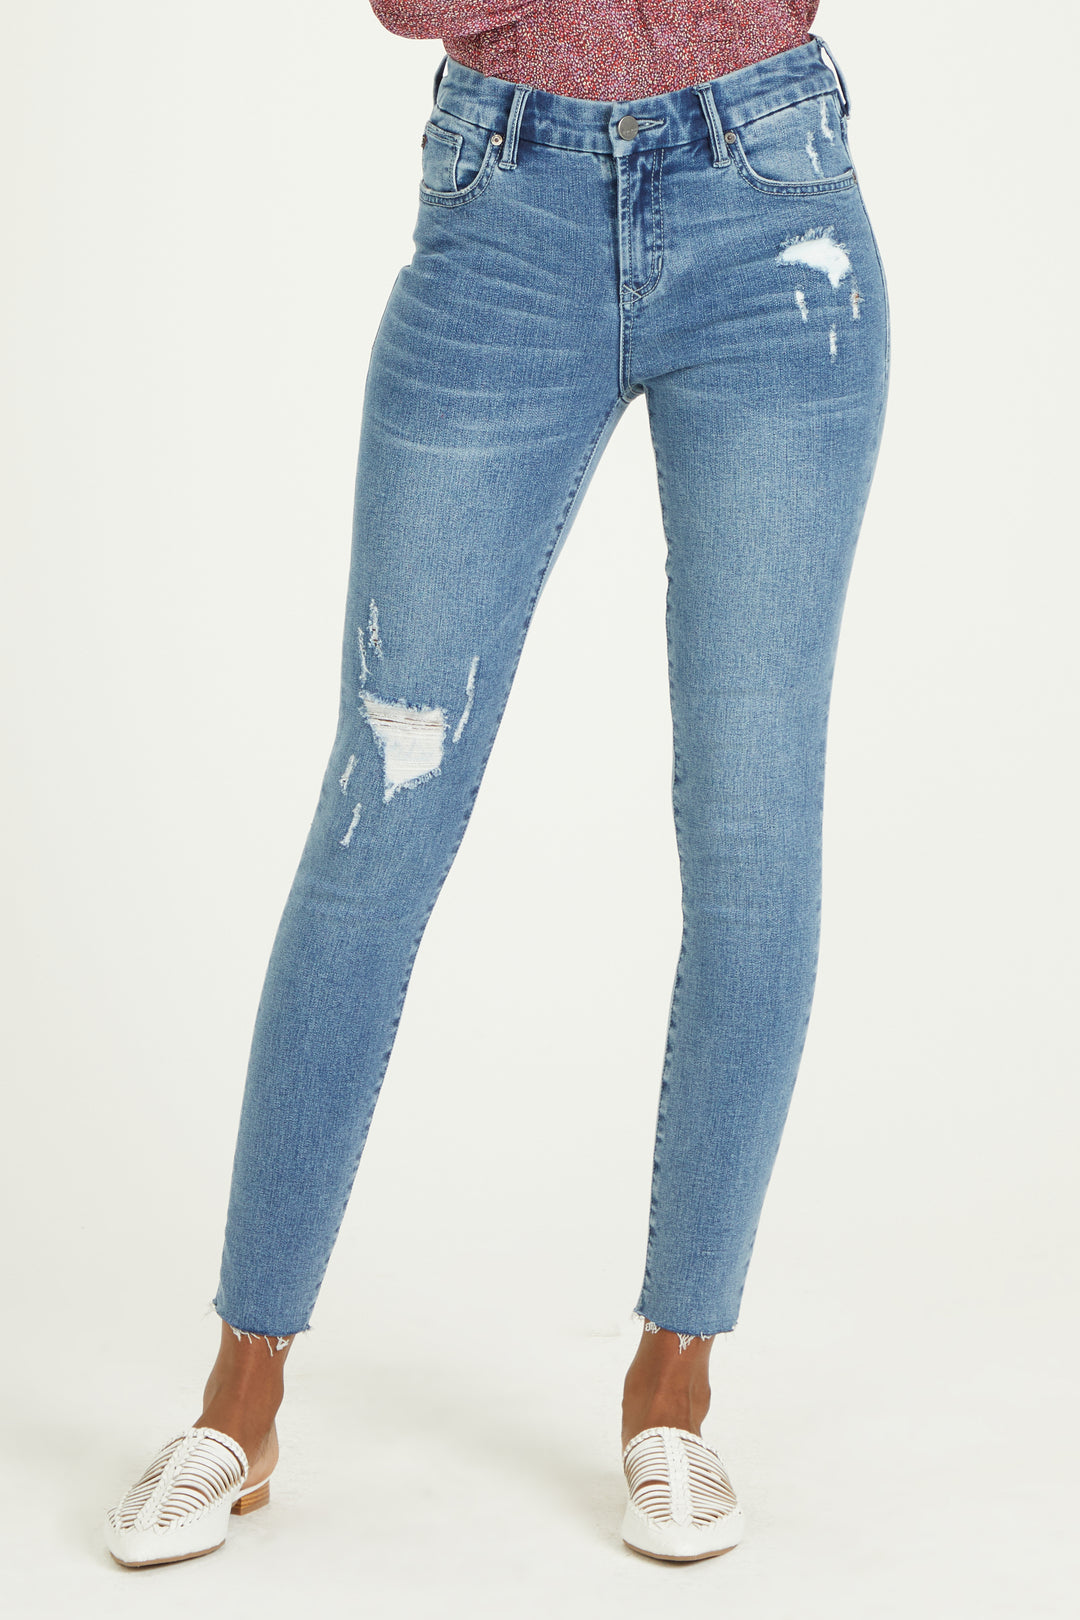 image of a female model wearing a 9 1/2" HIGH RISE GISELE SKINNY TOWNSVILLE JEANS